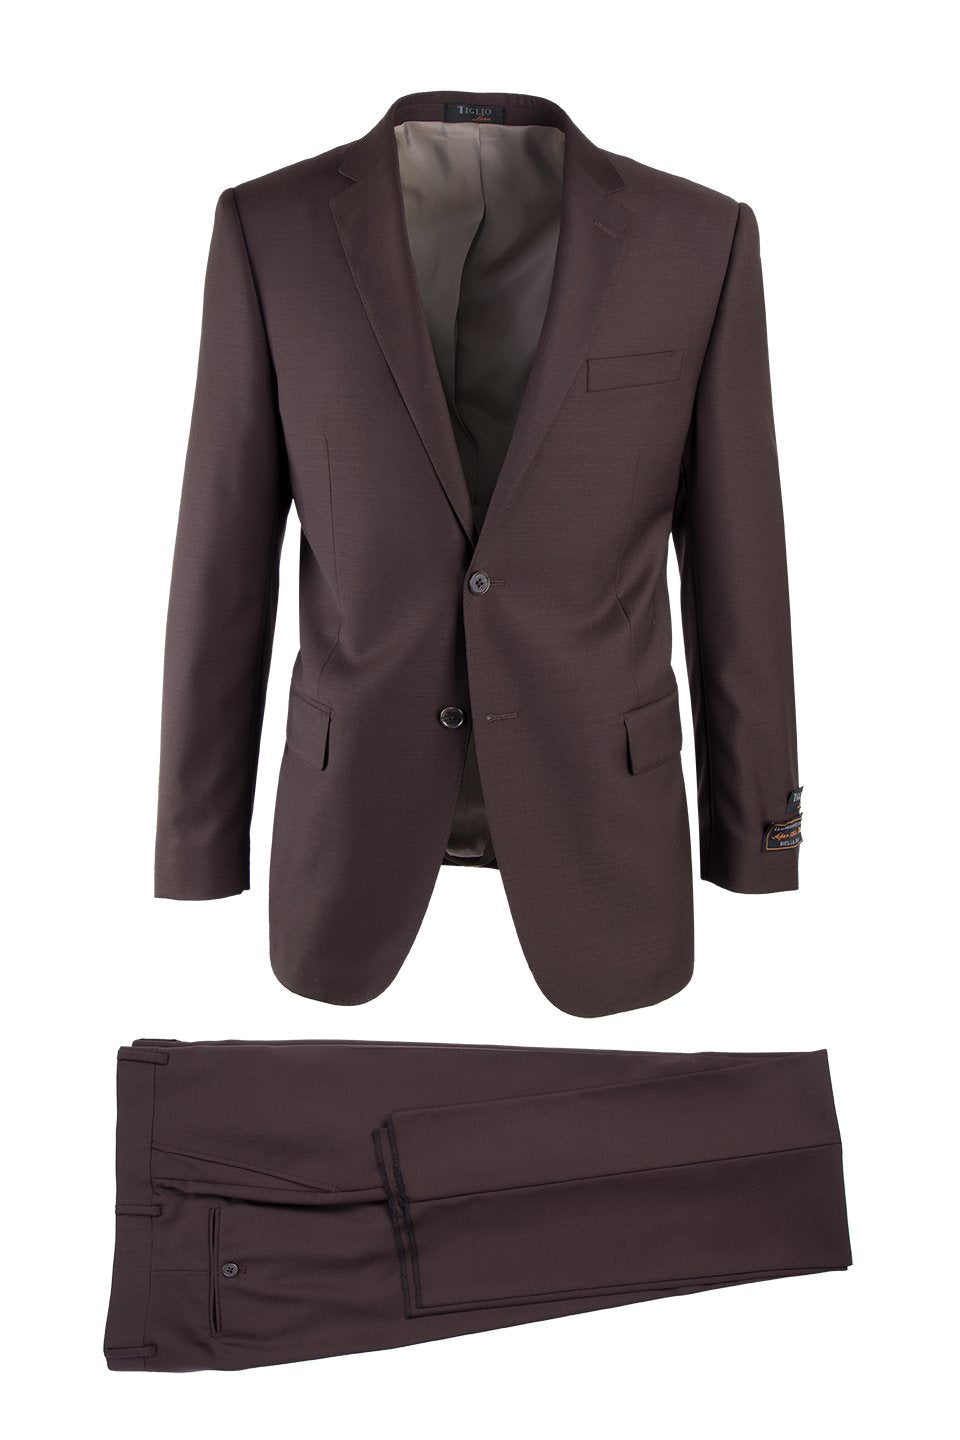 Novello Brown, Modern Fit, Pure Wool Suit by Tiglio Luxe